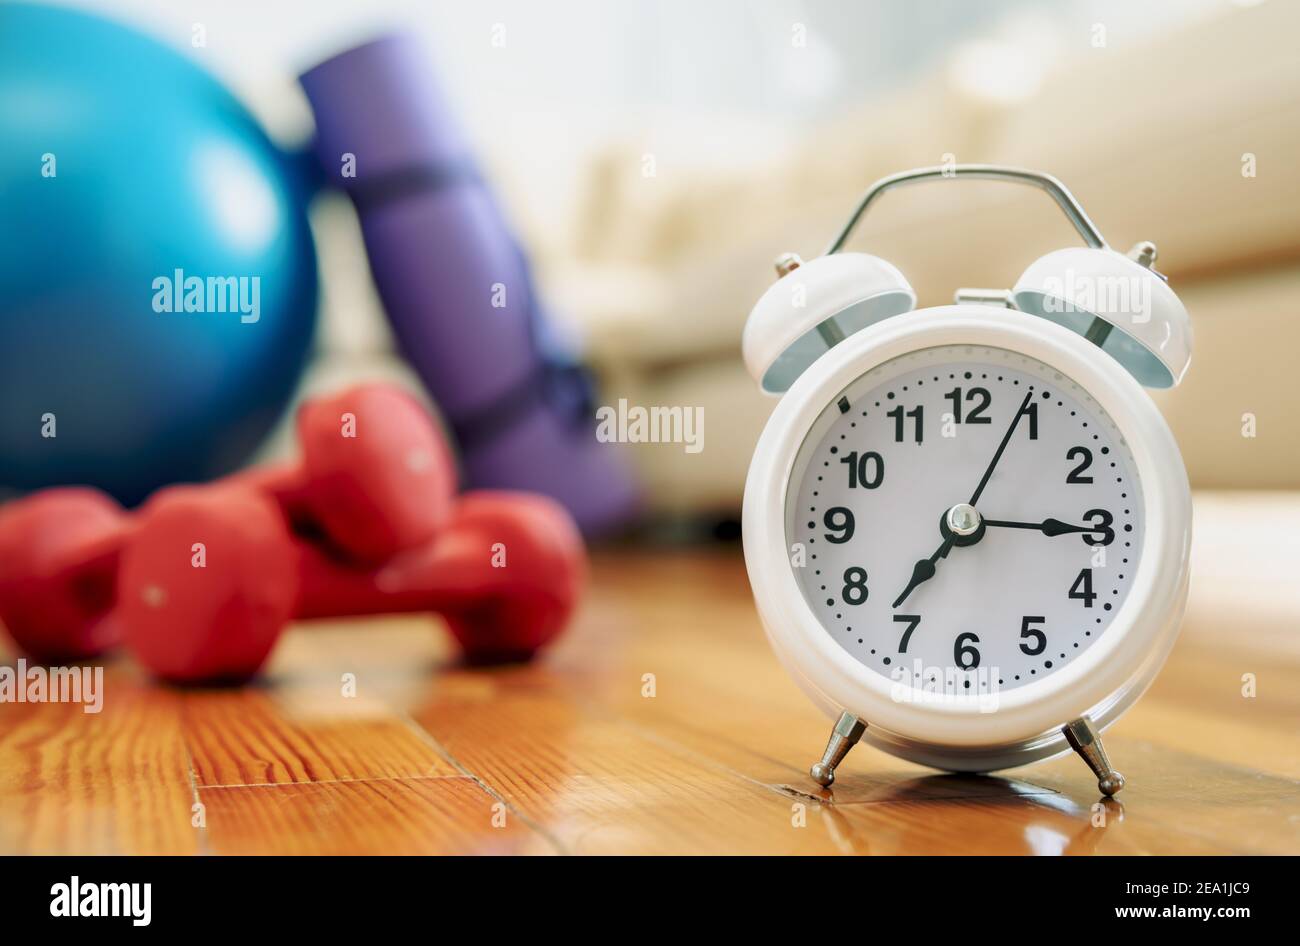 Alarm clock on the wooden floor with unfocus sports equipment and couch on background. Time for exercising concept Stock Photo